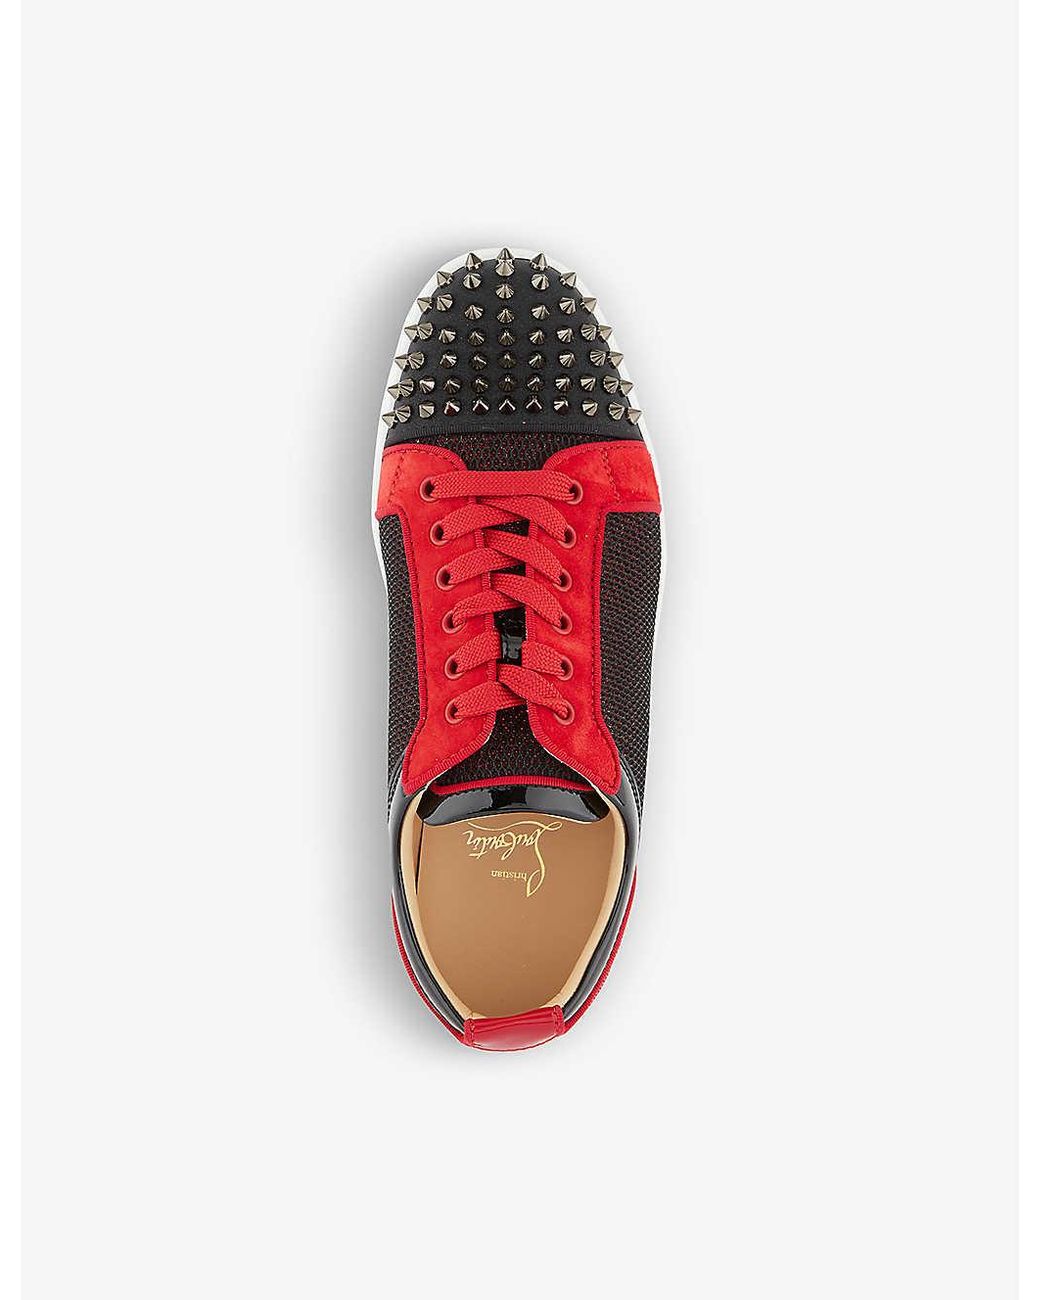 Christian Louboutin Mens Orlato Flat Red High Spikes Sneaker Shoes 40 7  $1300